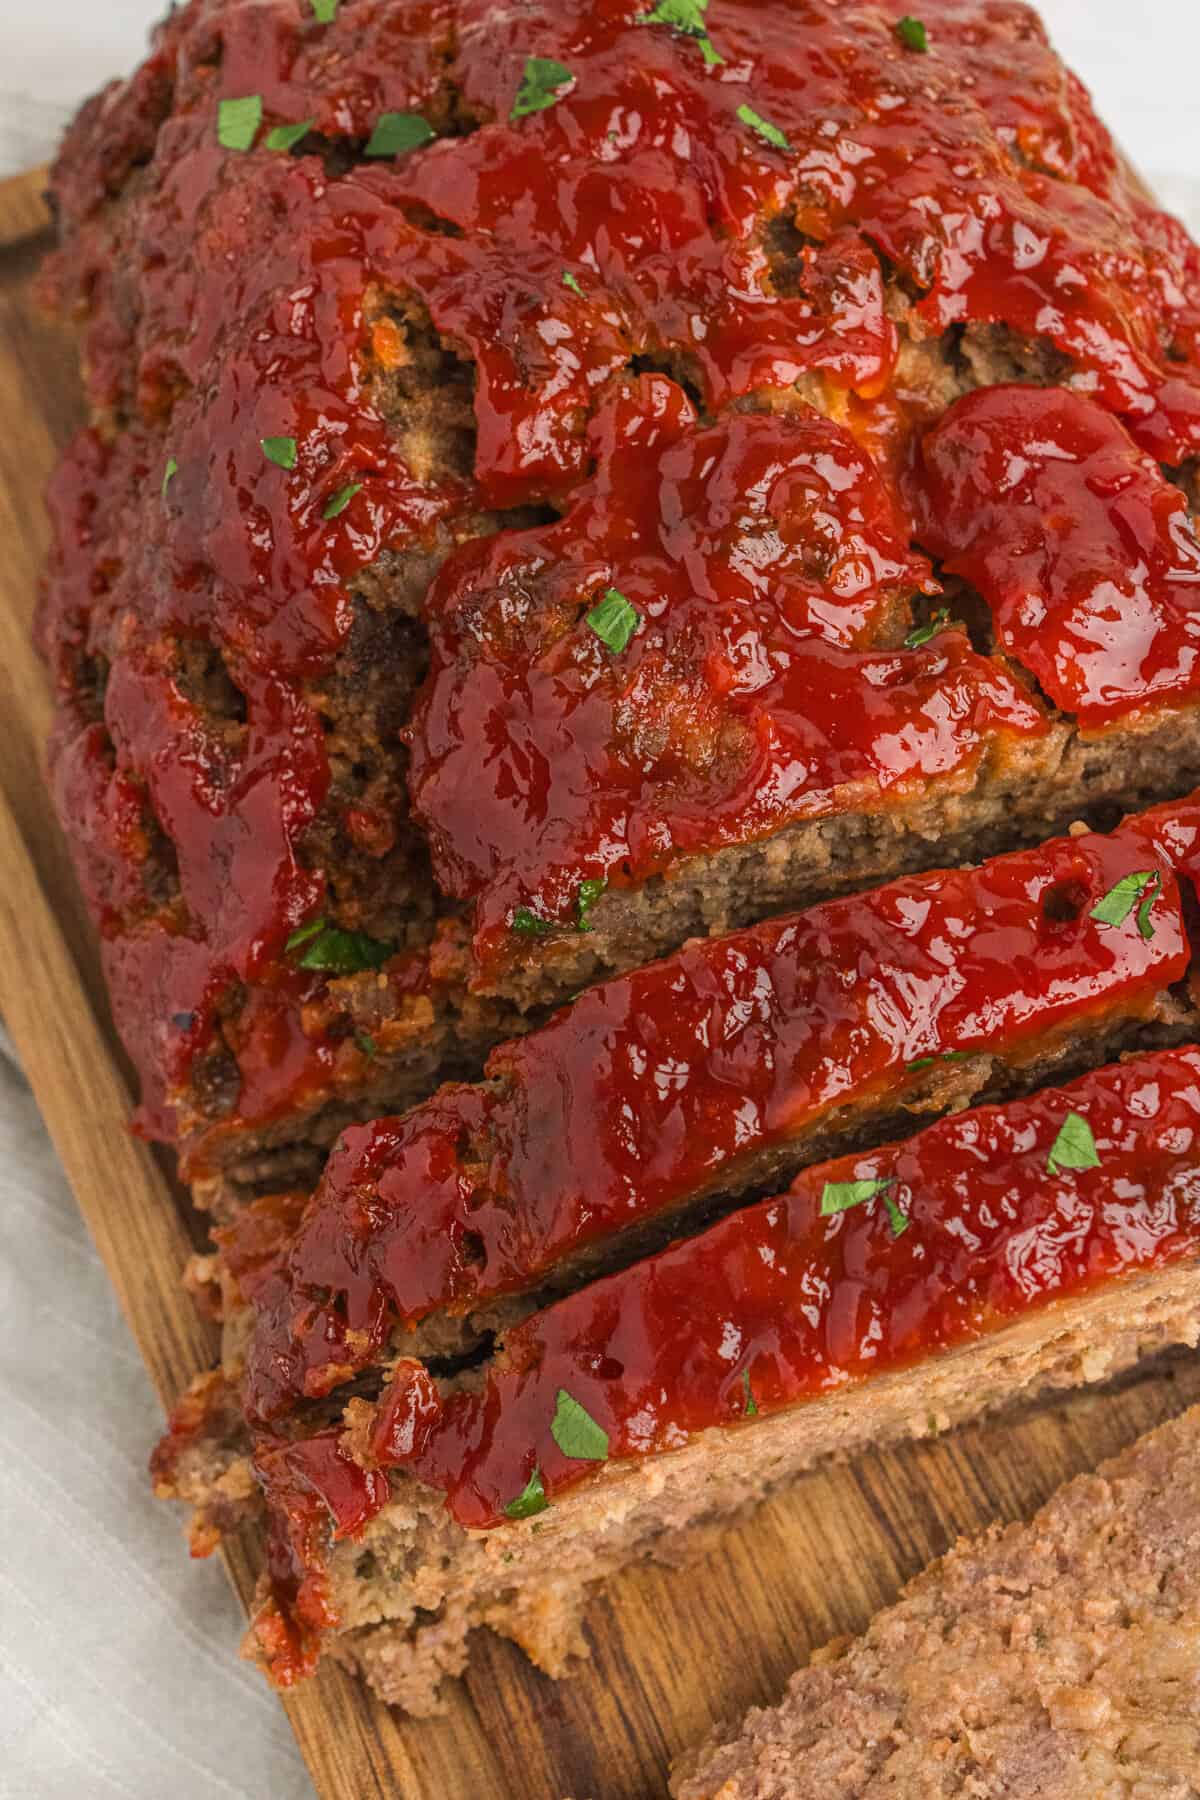 Meatloaf on cutting board, half has been sliced.